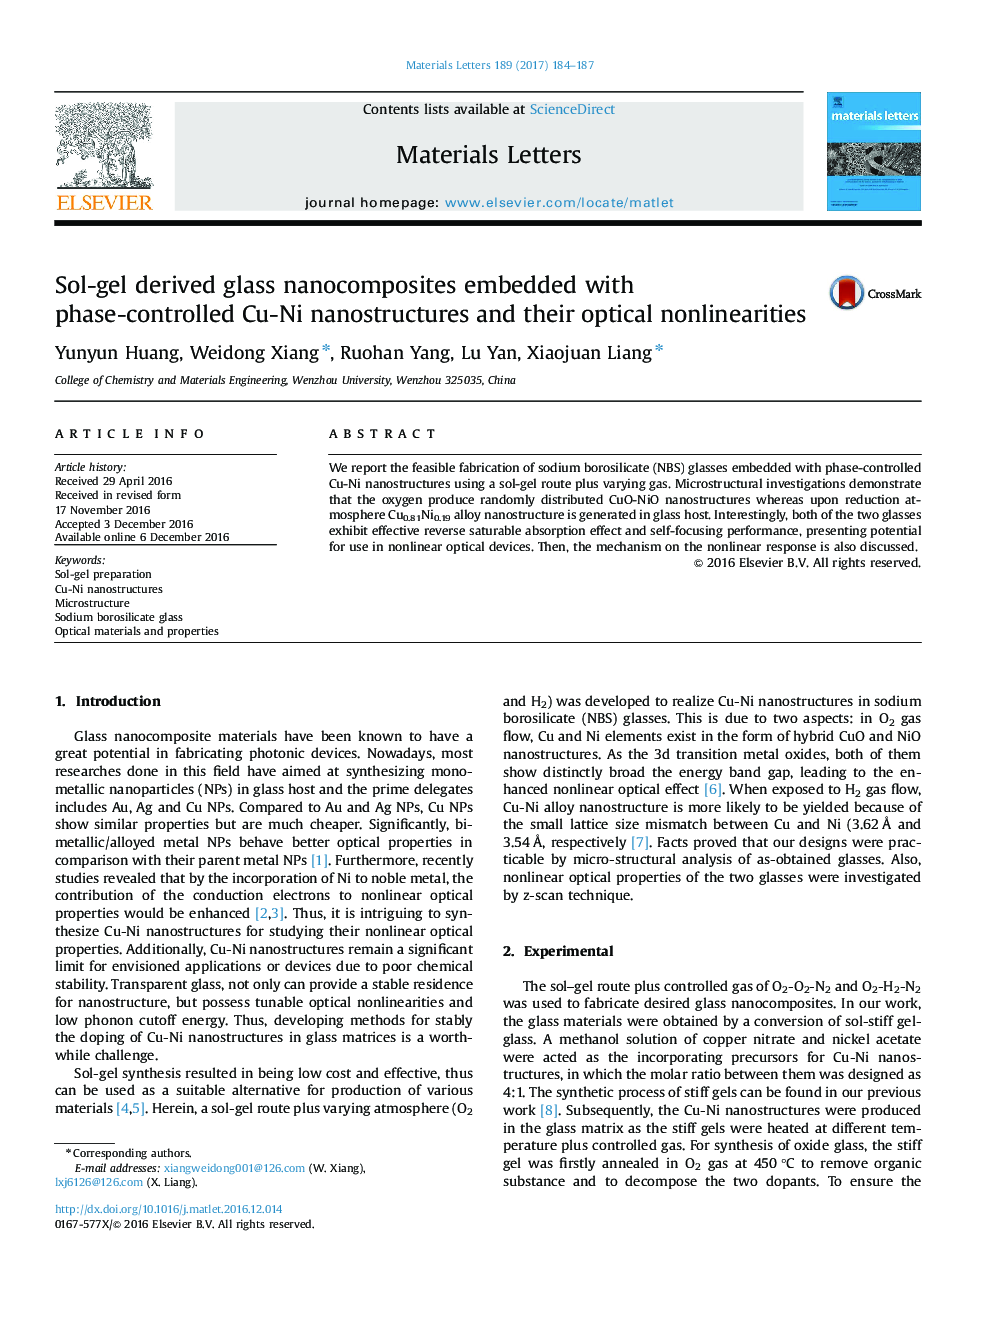 Sol-gel derived glass nanocomposites embedded with phase-controlled Cu-Ni nanostructures and their optical nonlinearities